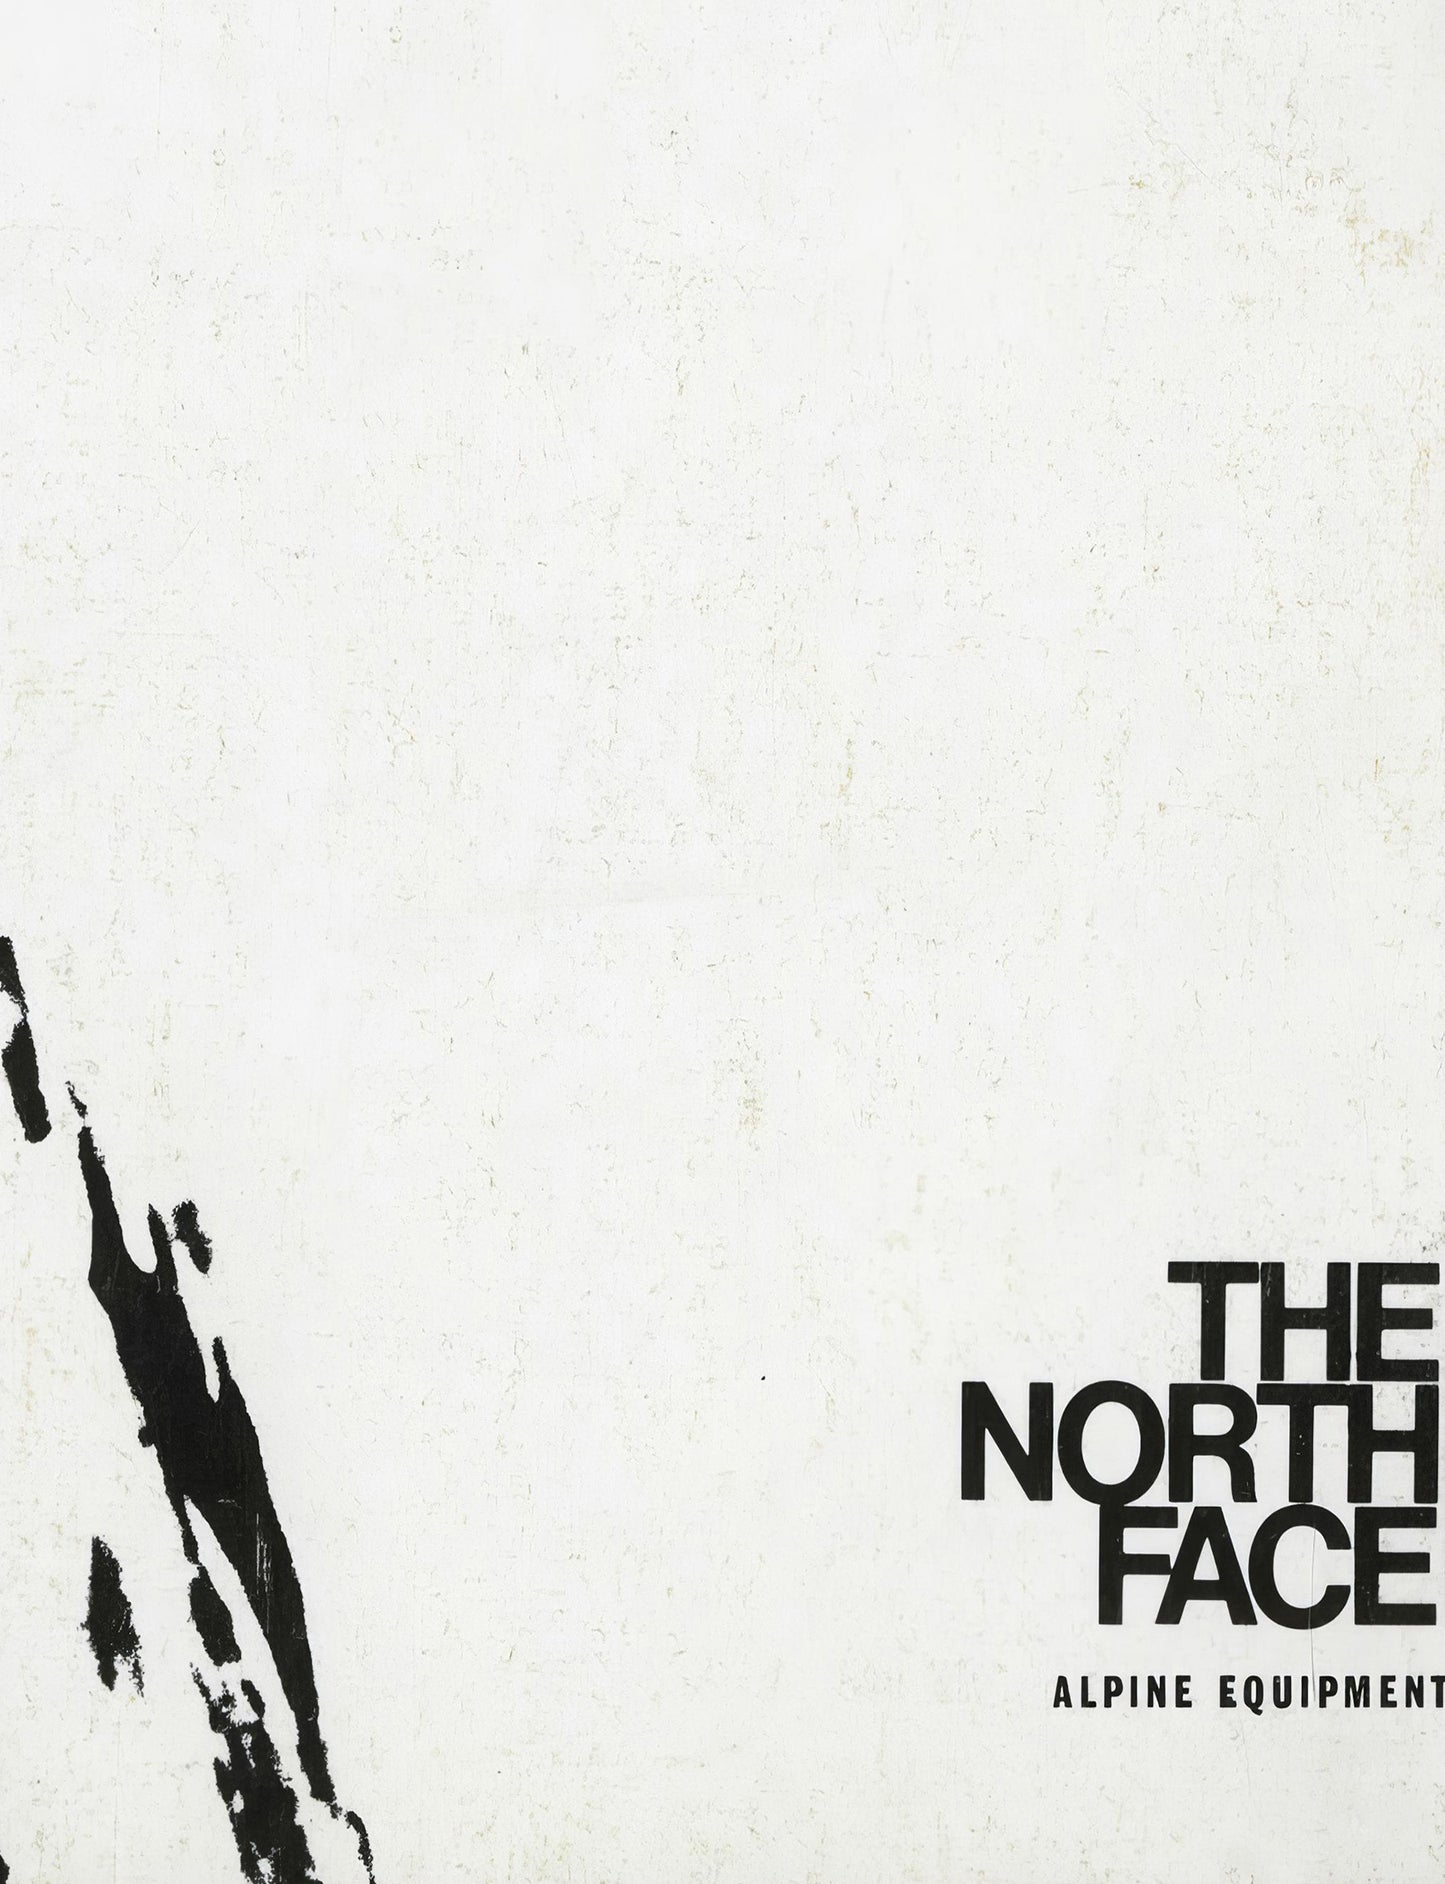 The North Face 1970 Magazine Front Cover Poster